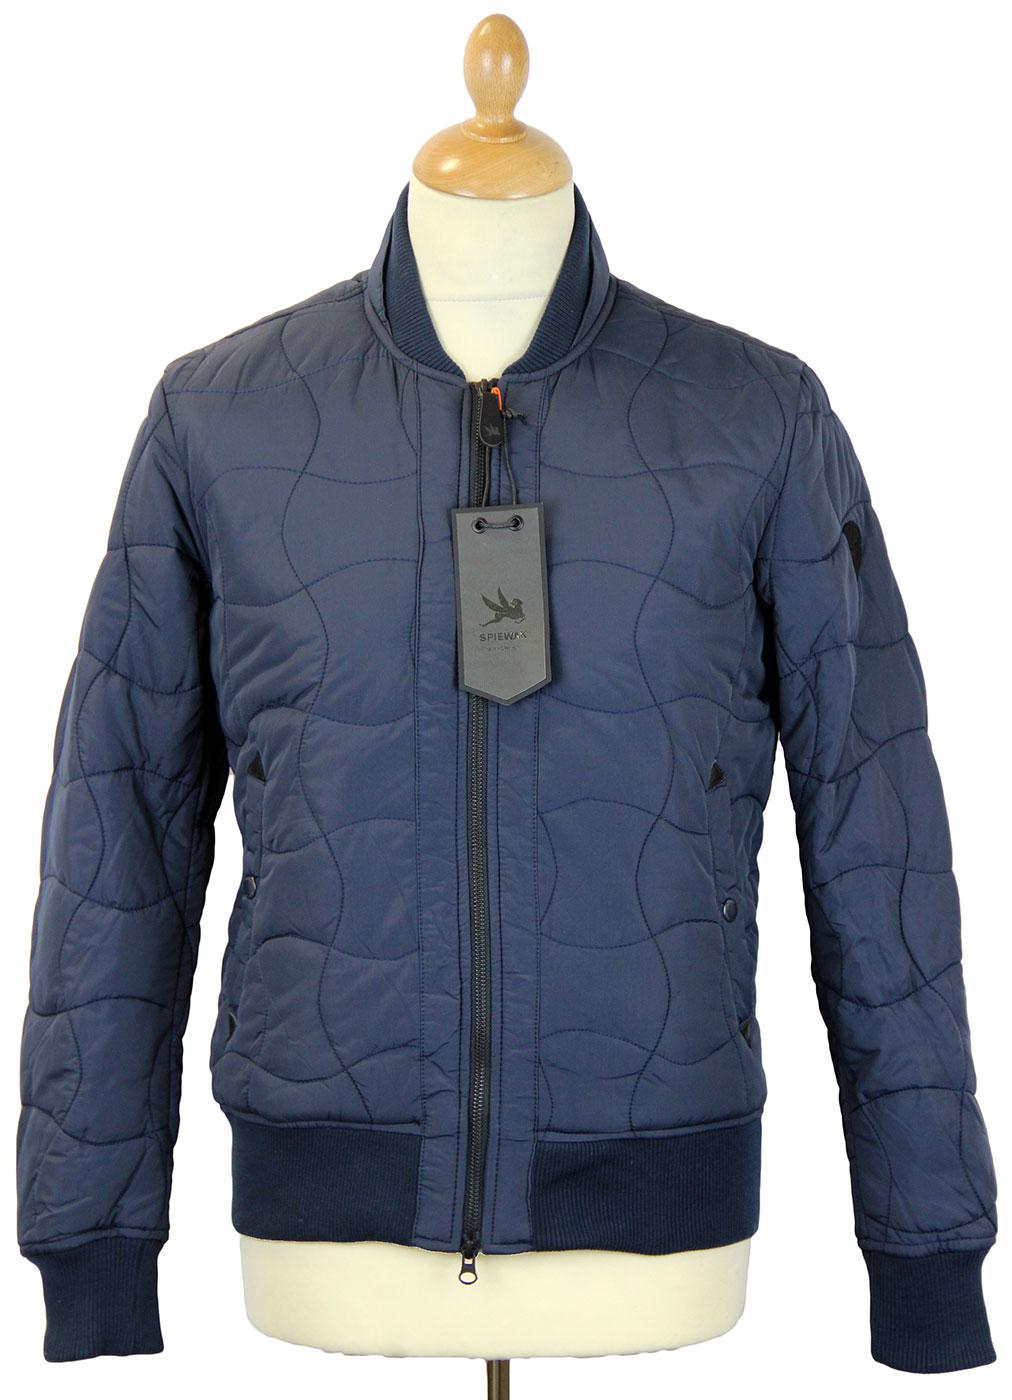 SPIEWAK Mod Onion Quilted MA1 Bomber Jacket (N)